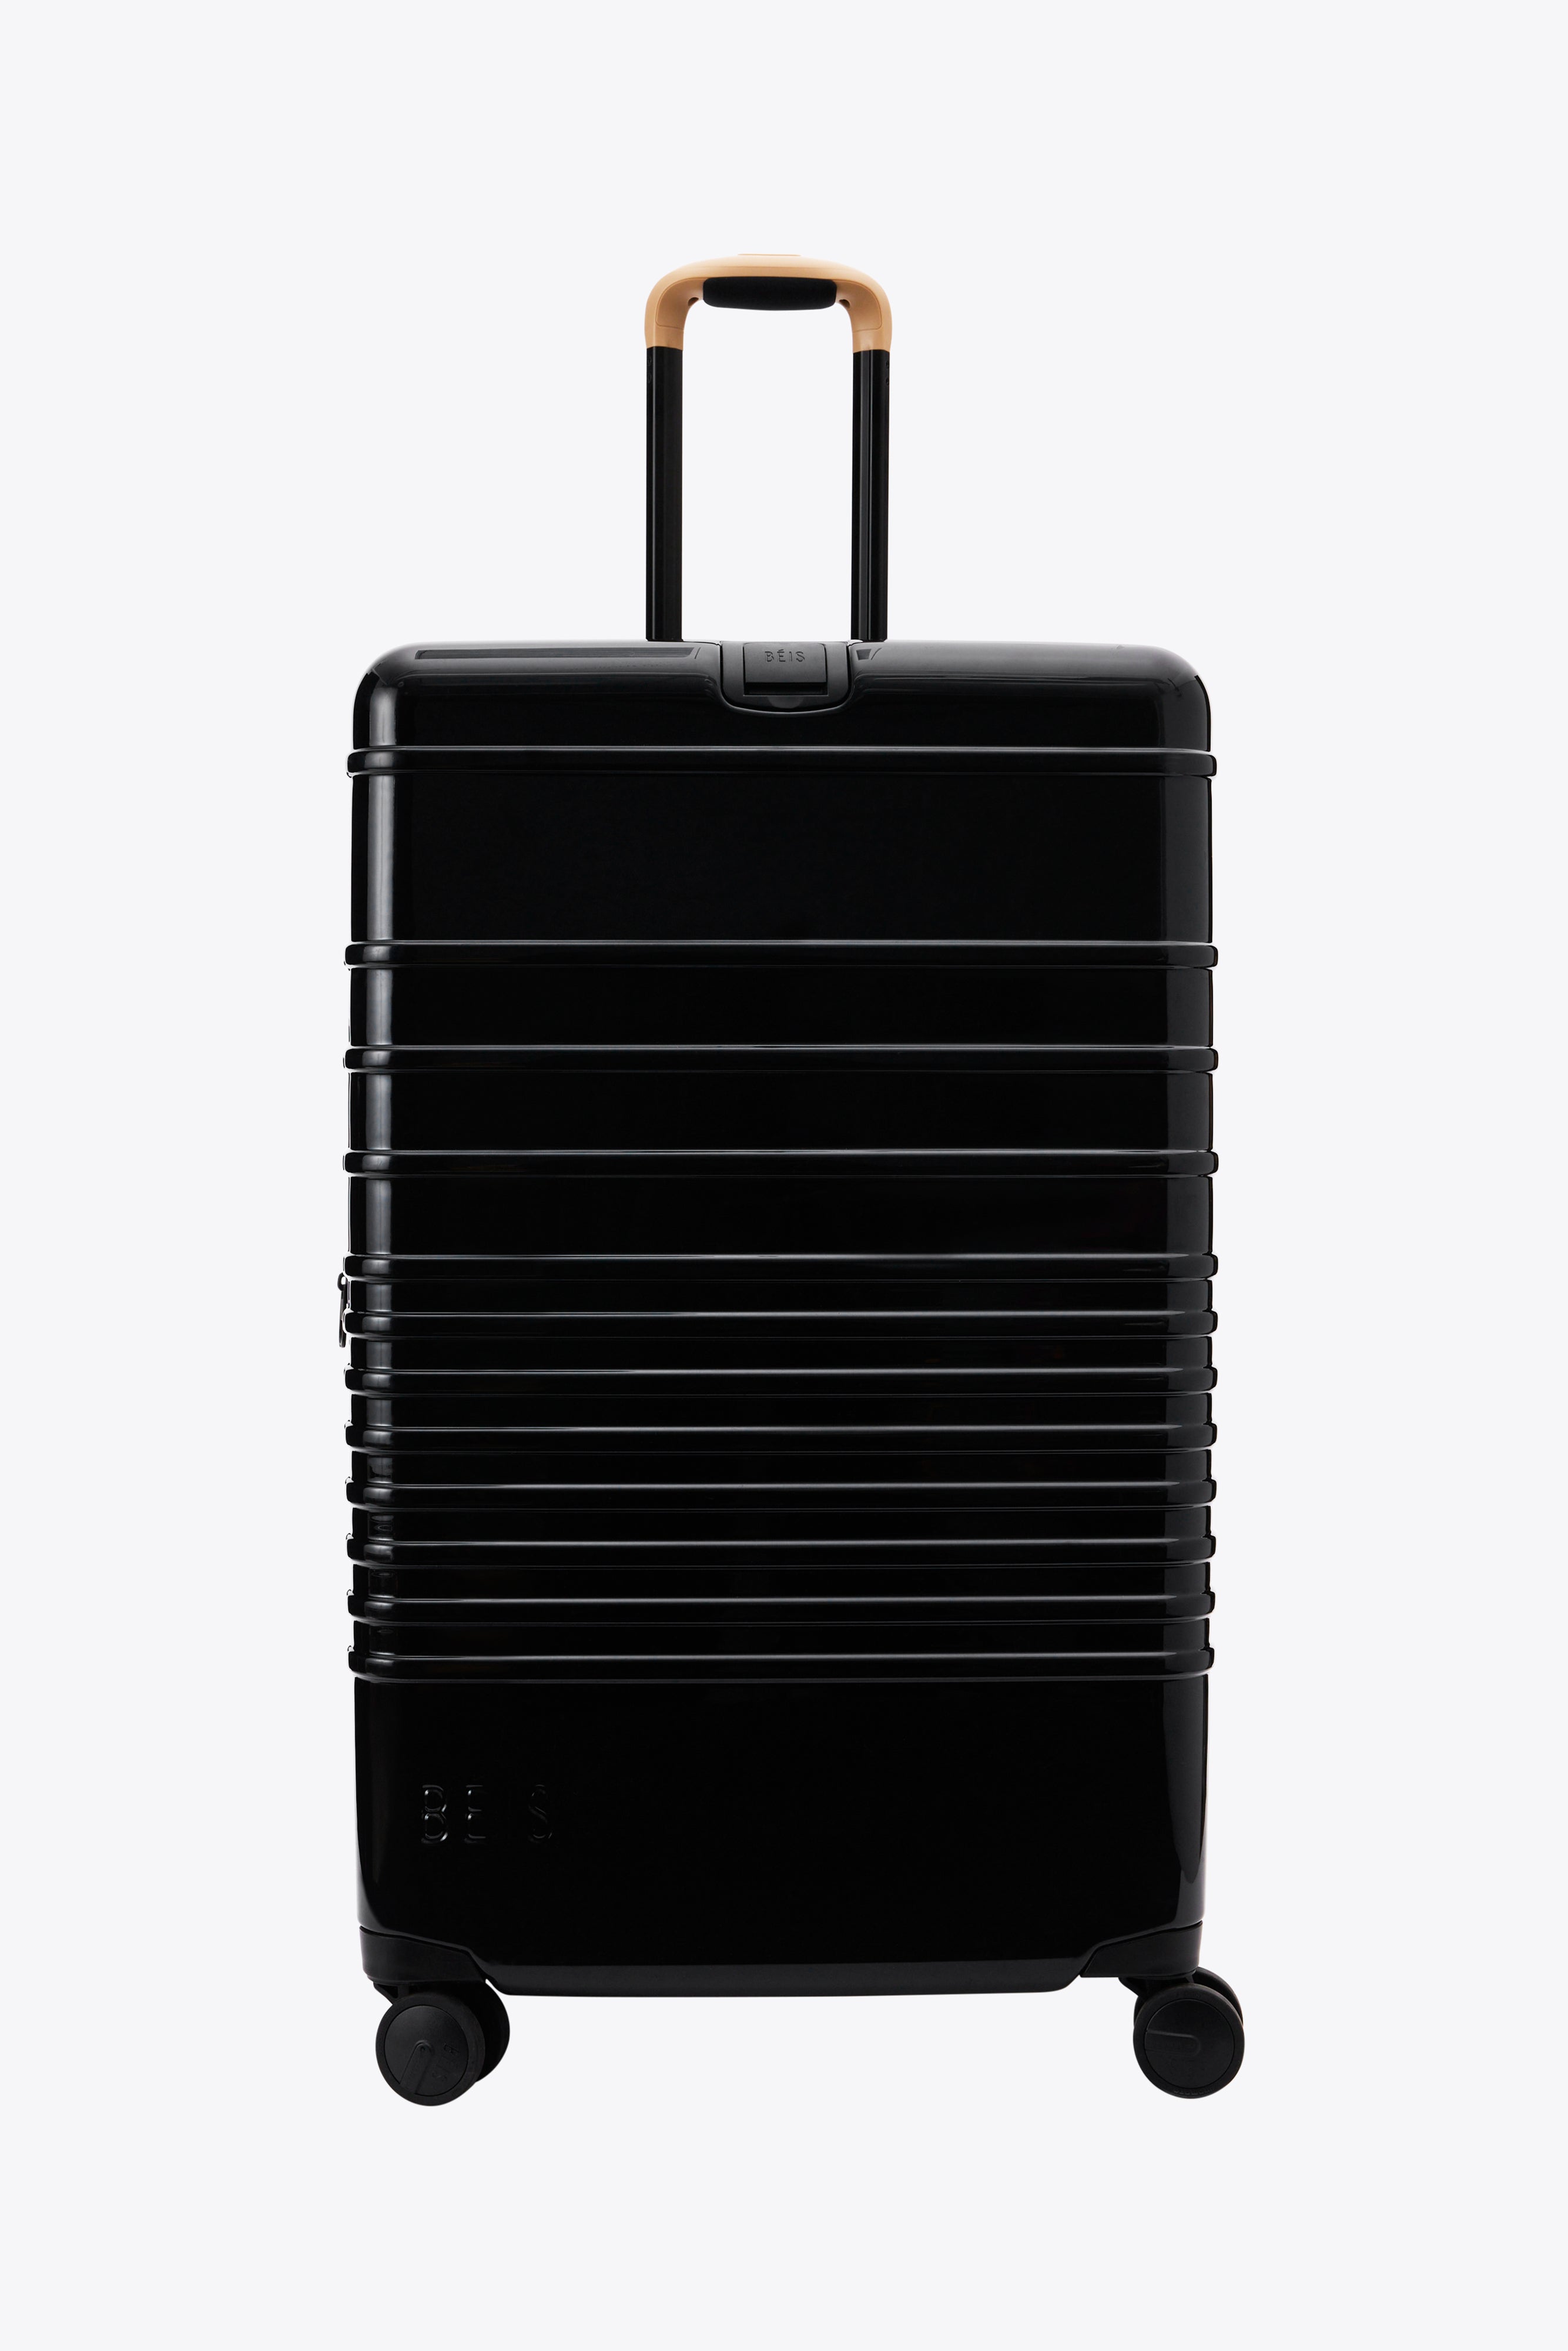 Luggage - Travel Luggage & Rolling Suitcases | BÉIS Travel EU